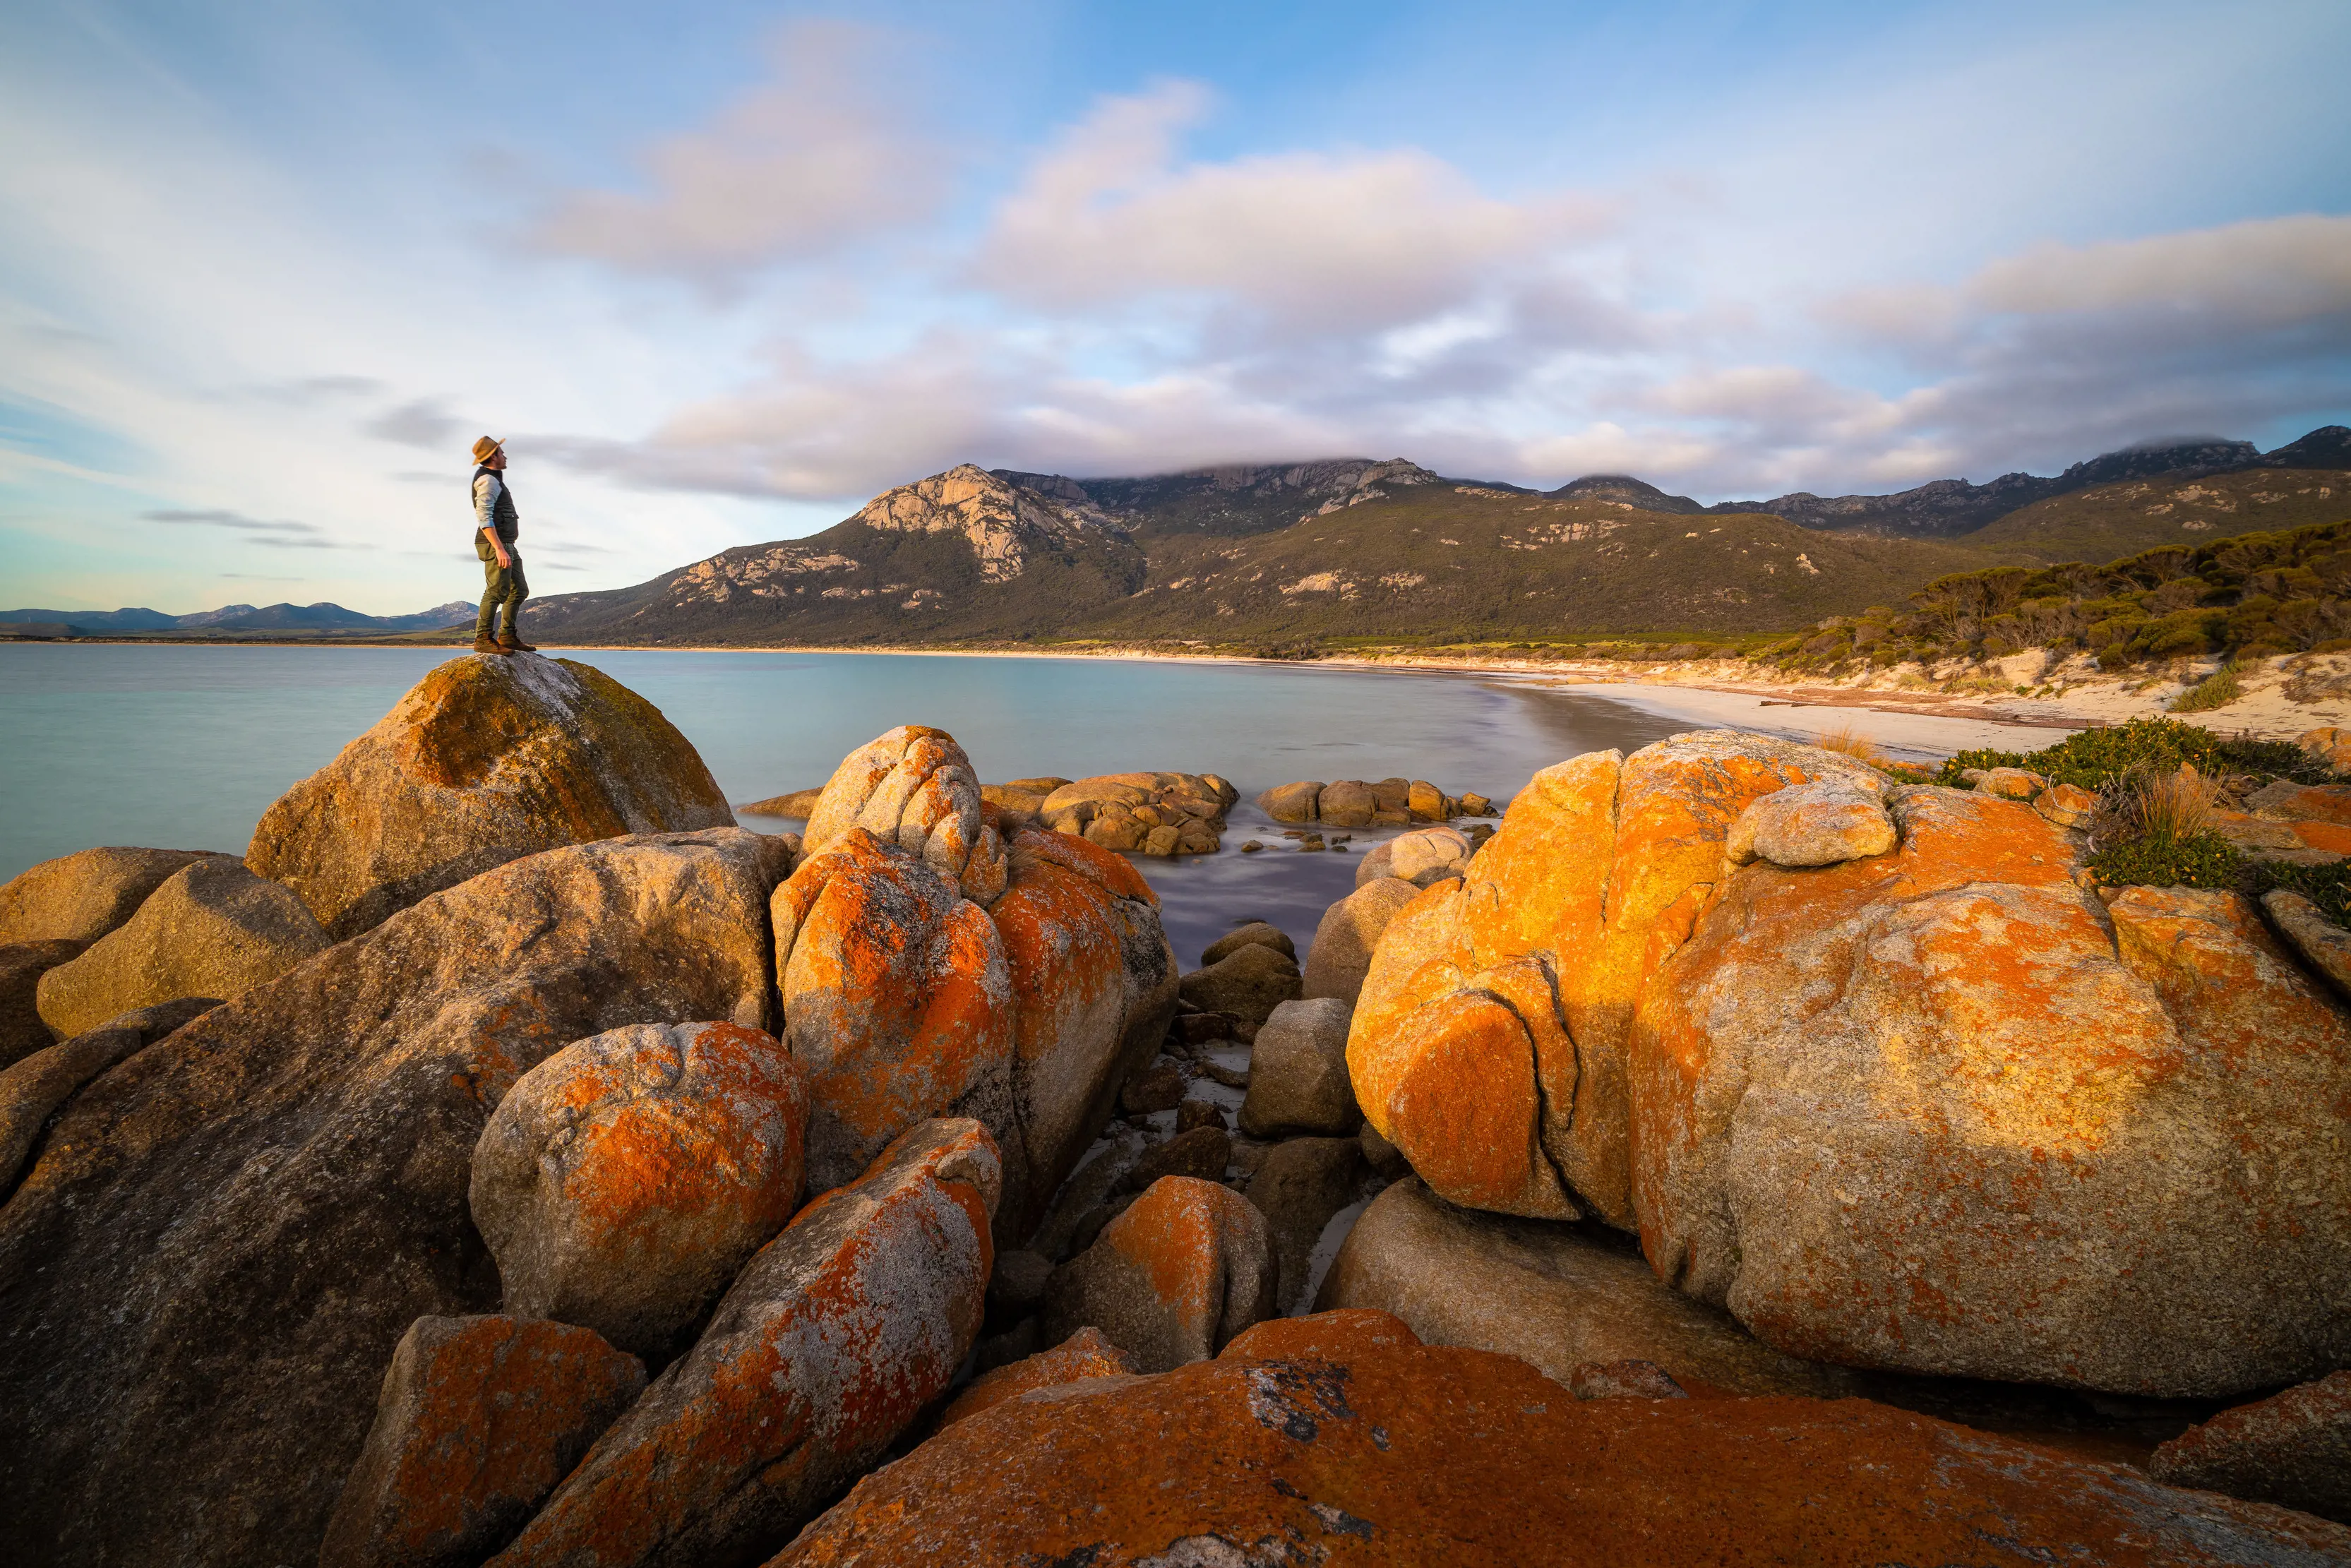 Breathtaking image of Fotheringate Bay, Flinders Island, of a man standing on a large rock, looking over the stunning coastline.